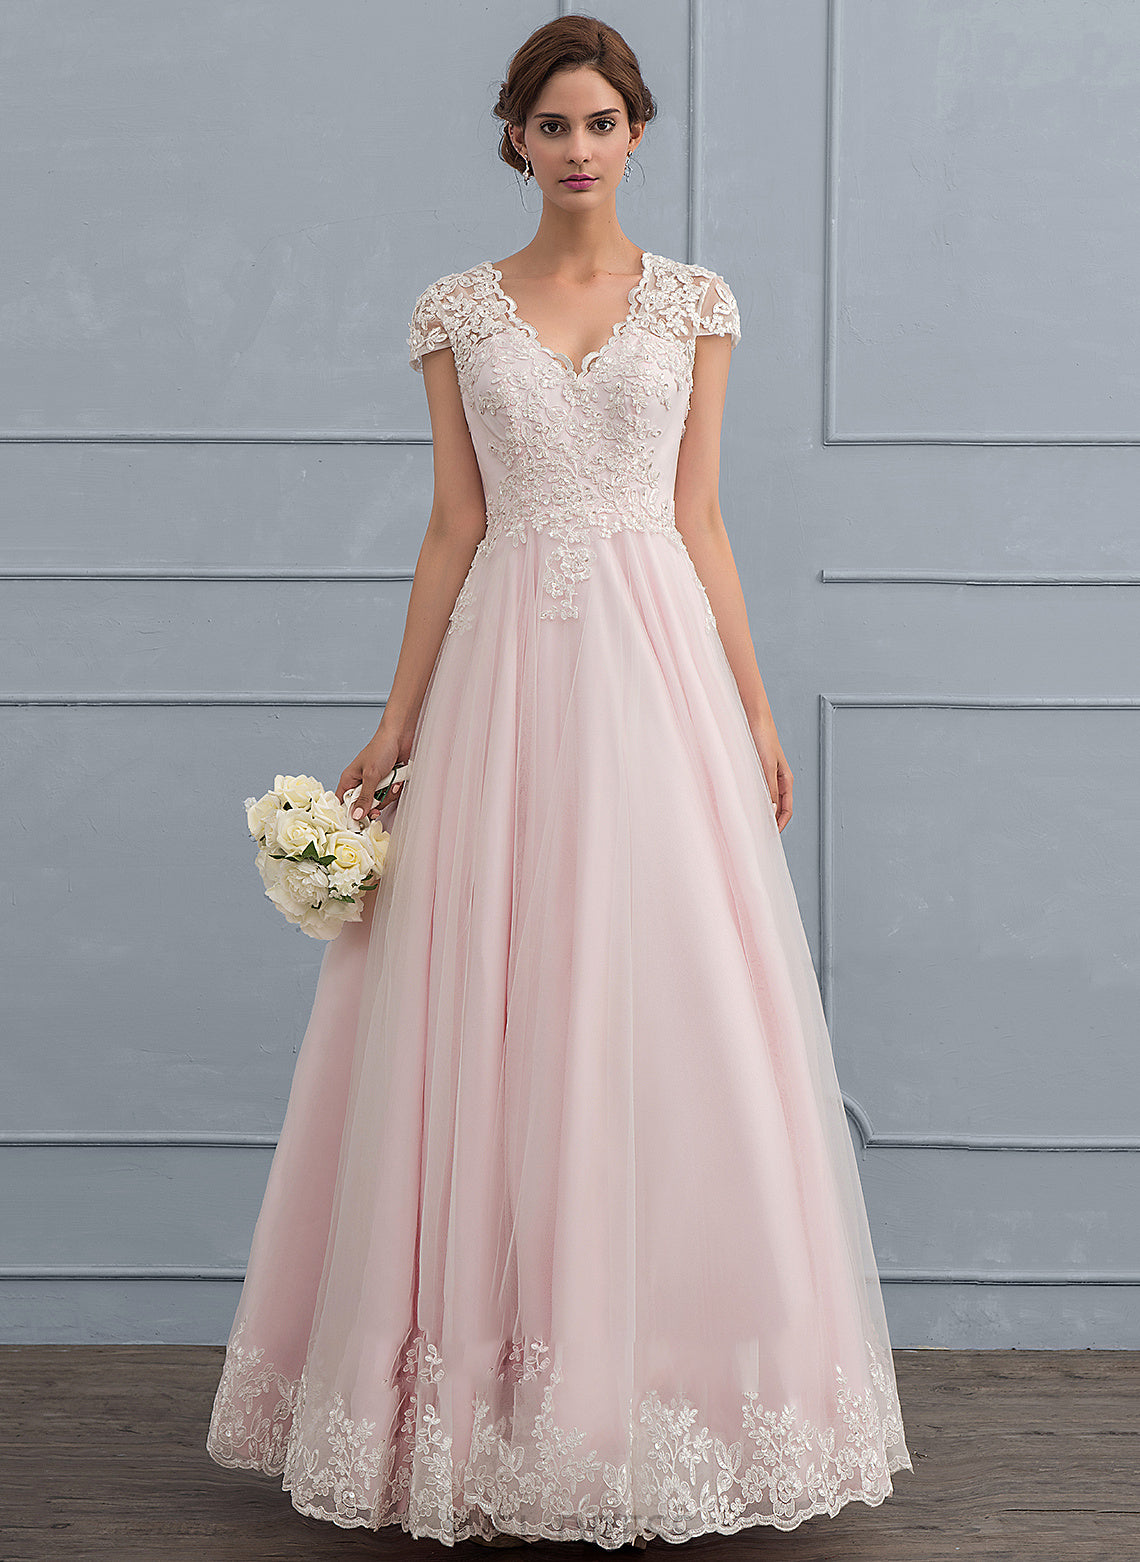 Tulle Dress Beading Angelique With V-neck Floor-Length Wedding Dresses Sequins Ball-Gown/Princess Wedding